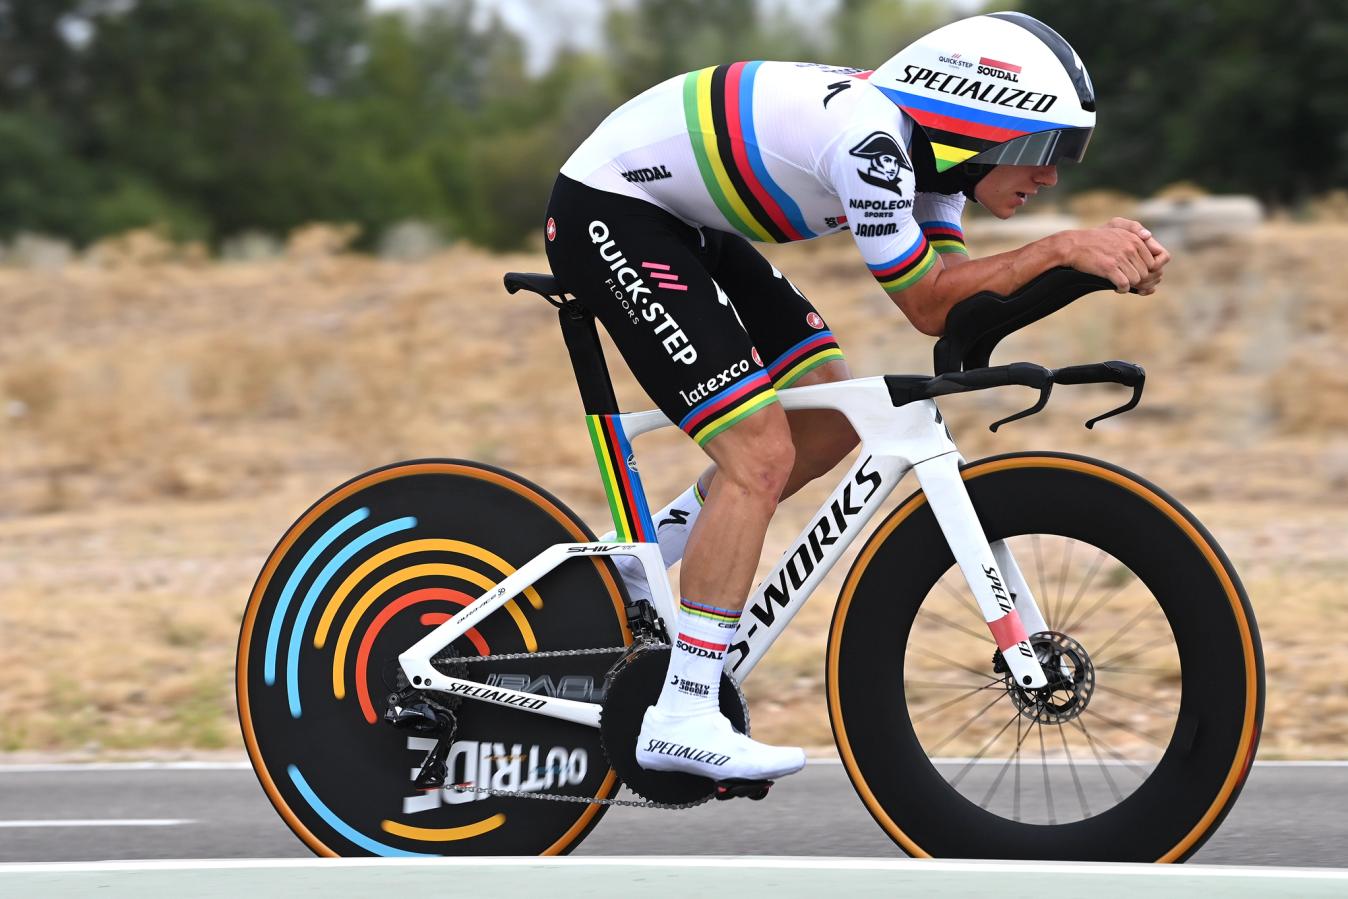 The typical transponder location on the fork leg of Remco Evenepoel's Specialized Shiv TT 